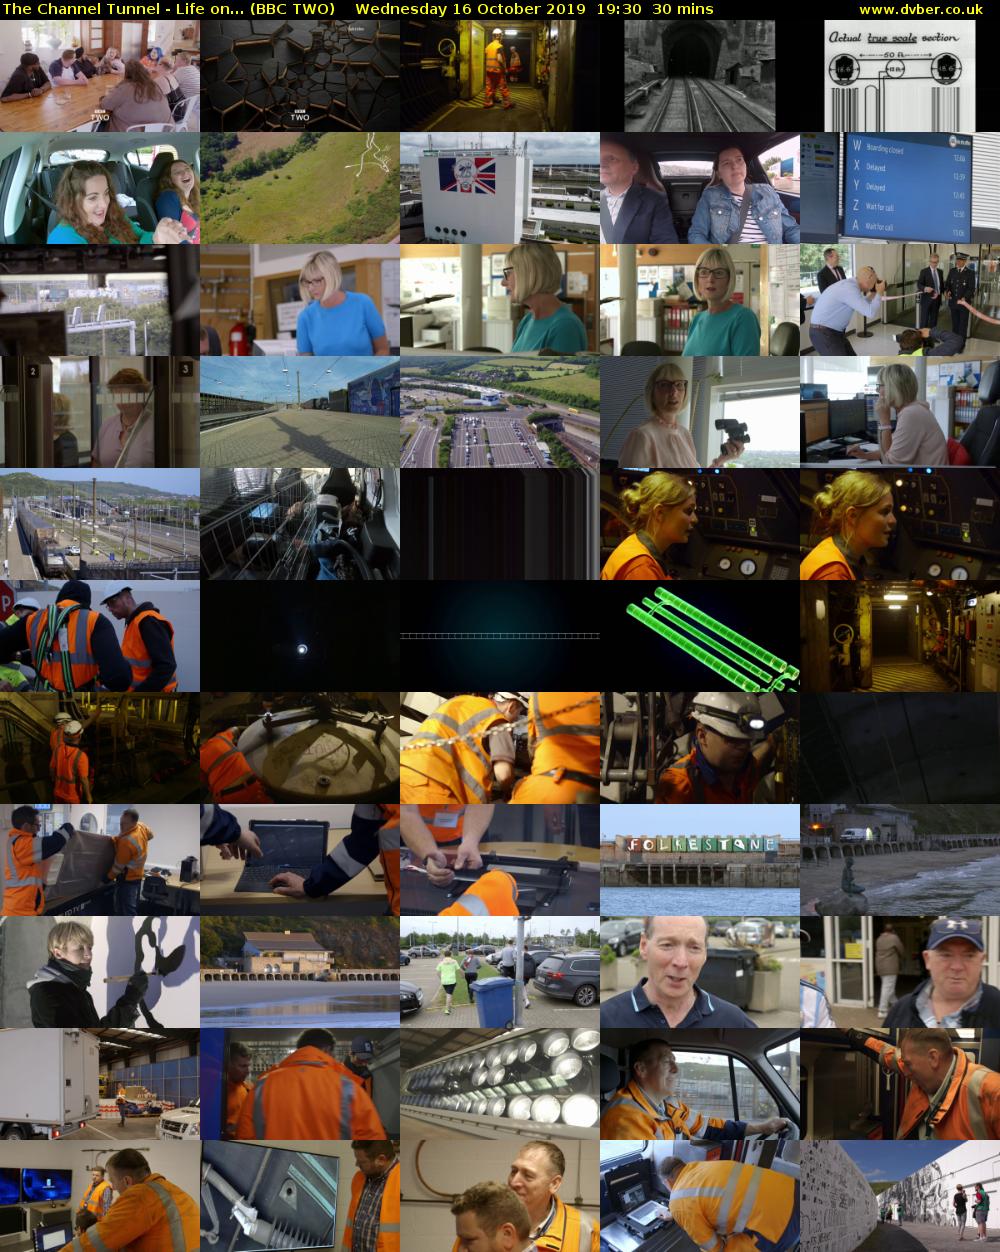 The Channel Tunnel - Life on... (BBC TWO) Wednesday 16 October 2019 19:30 - 20:00